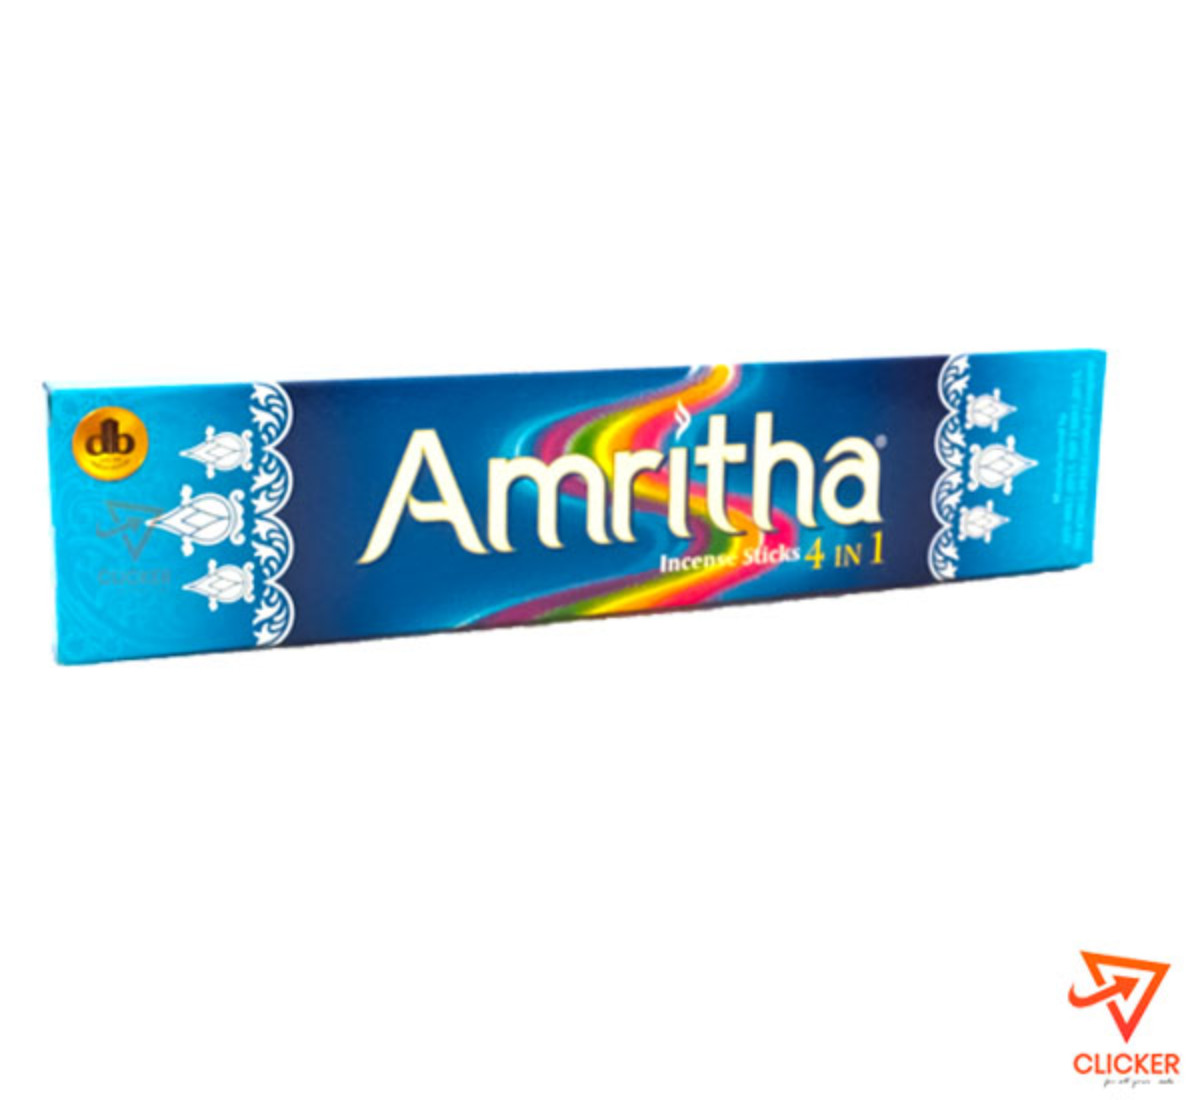 Clicker product 30g AMRITHA 4in1 incense sticks 853